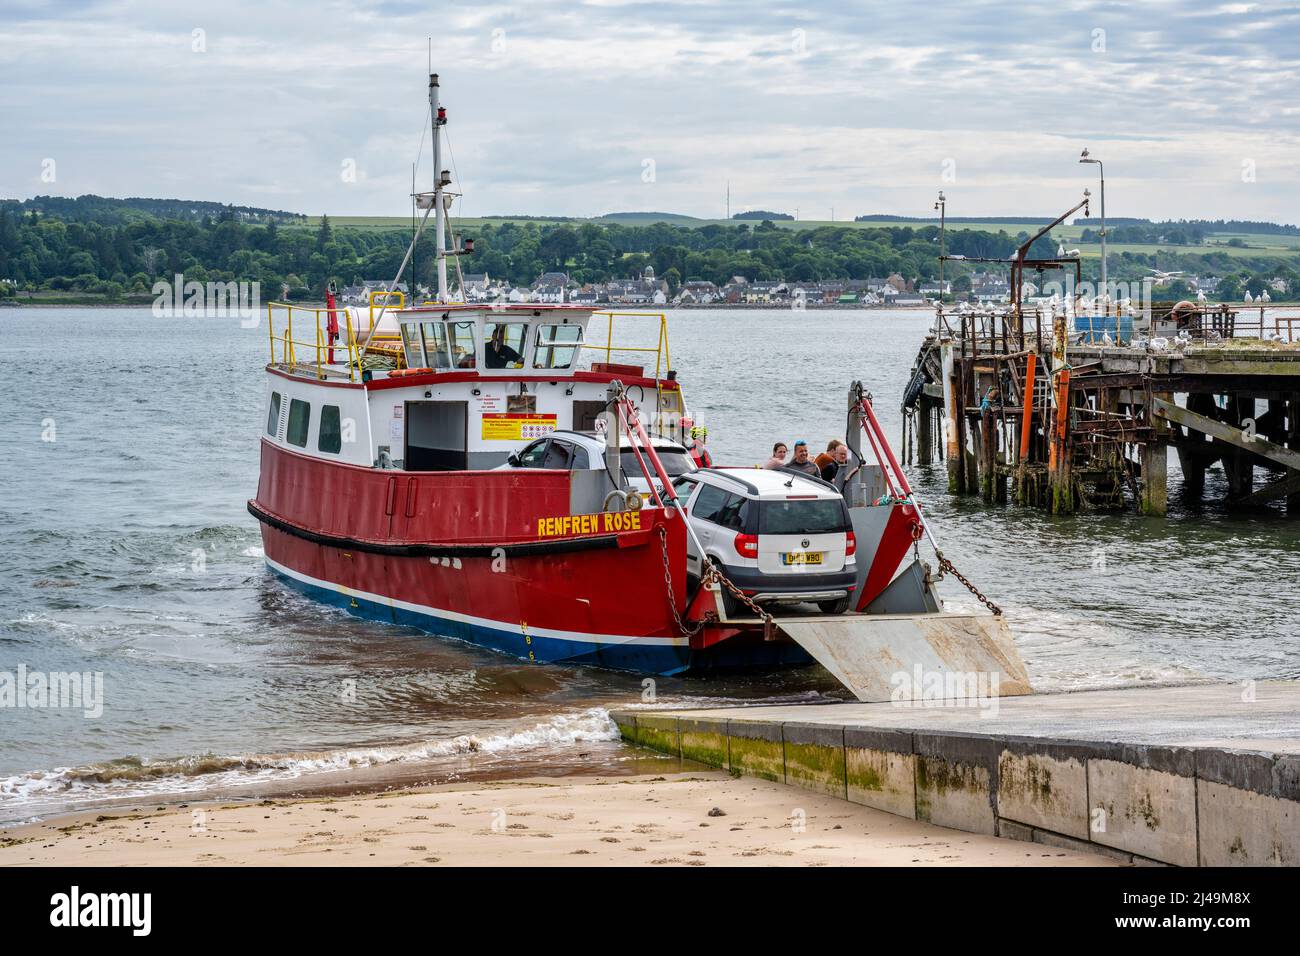 Ferry arriving at Nigg Ferry Terminal, with old Balintraid Pier in background – Nigg, Easter Ross Peninsula, Ross and Cromarty, Highland, Scotland, UK Stock Photo